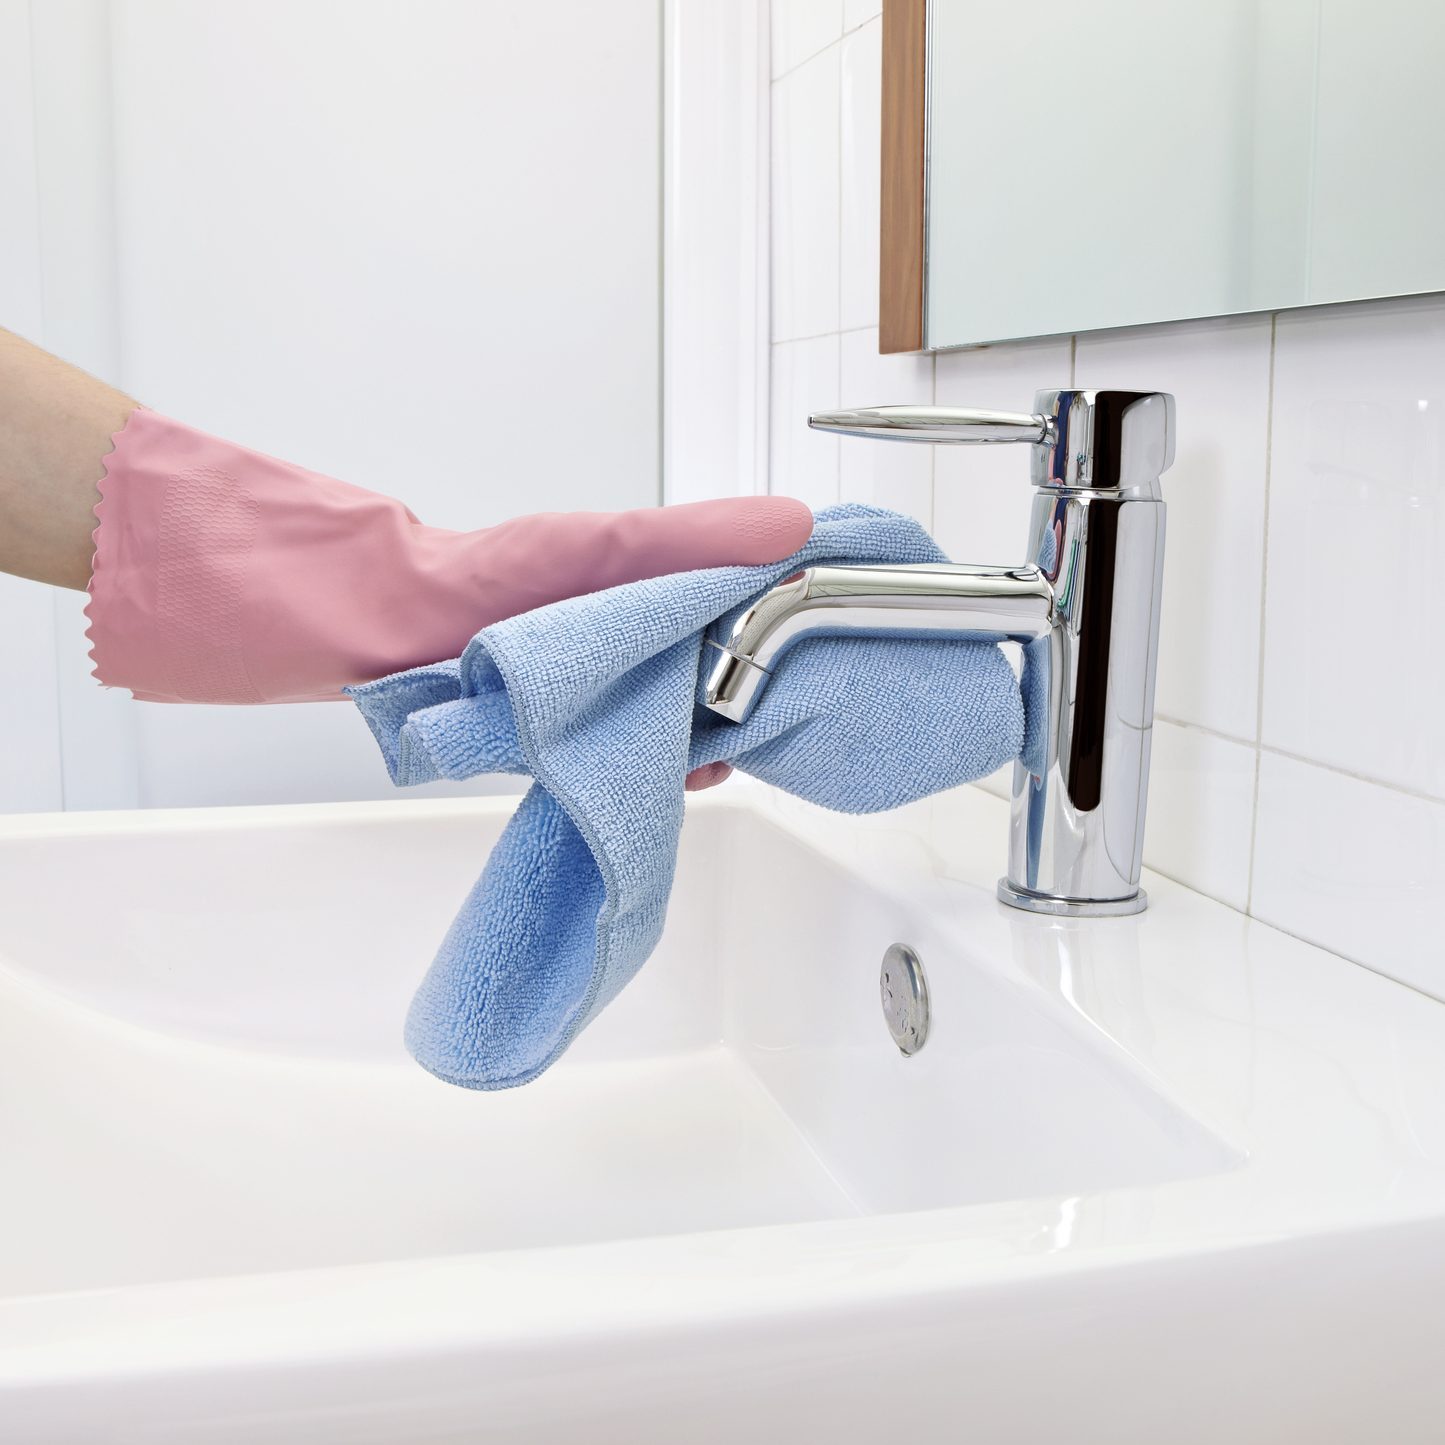 Why Microfiber Cleaning Cloths Should Be In Your Kitchen